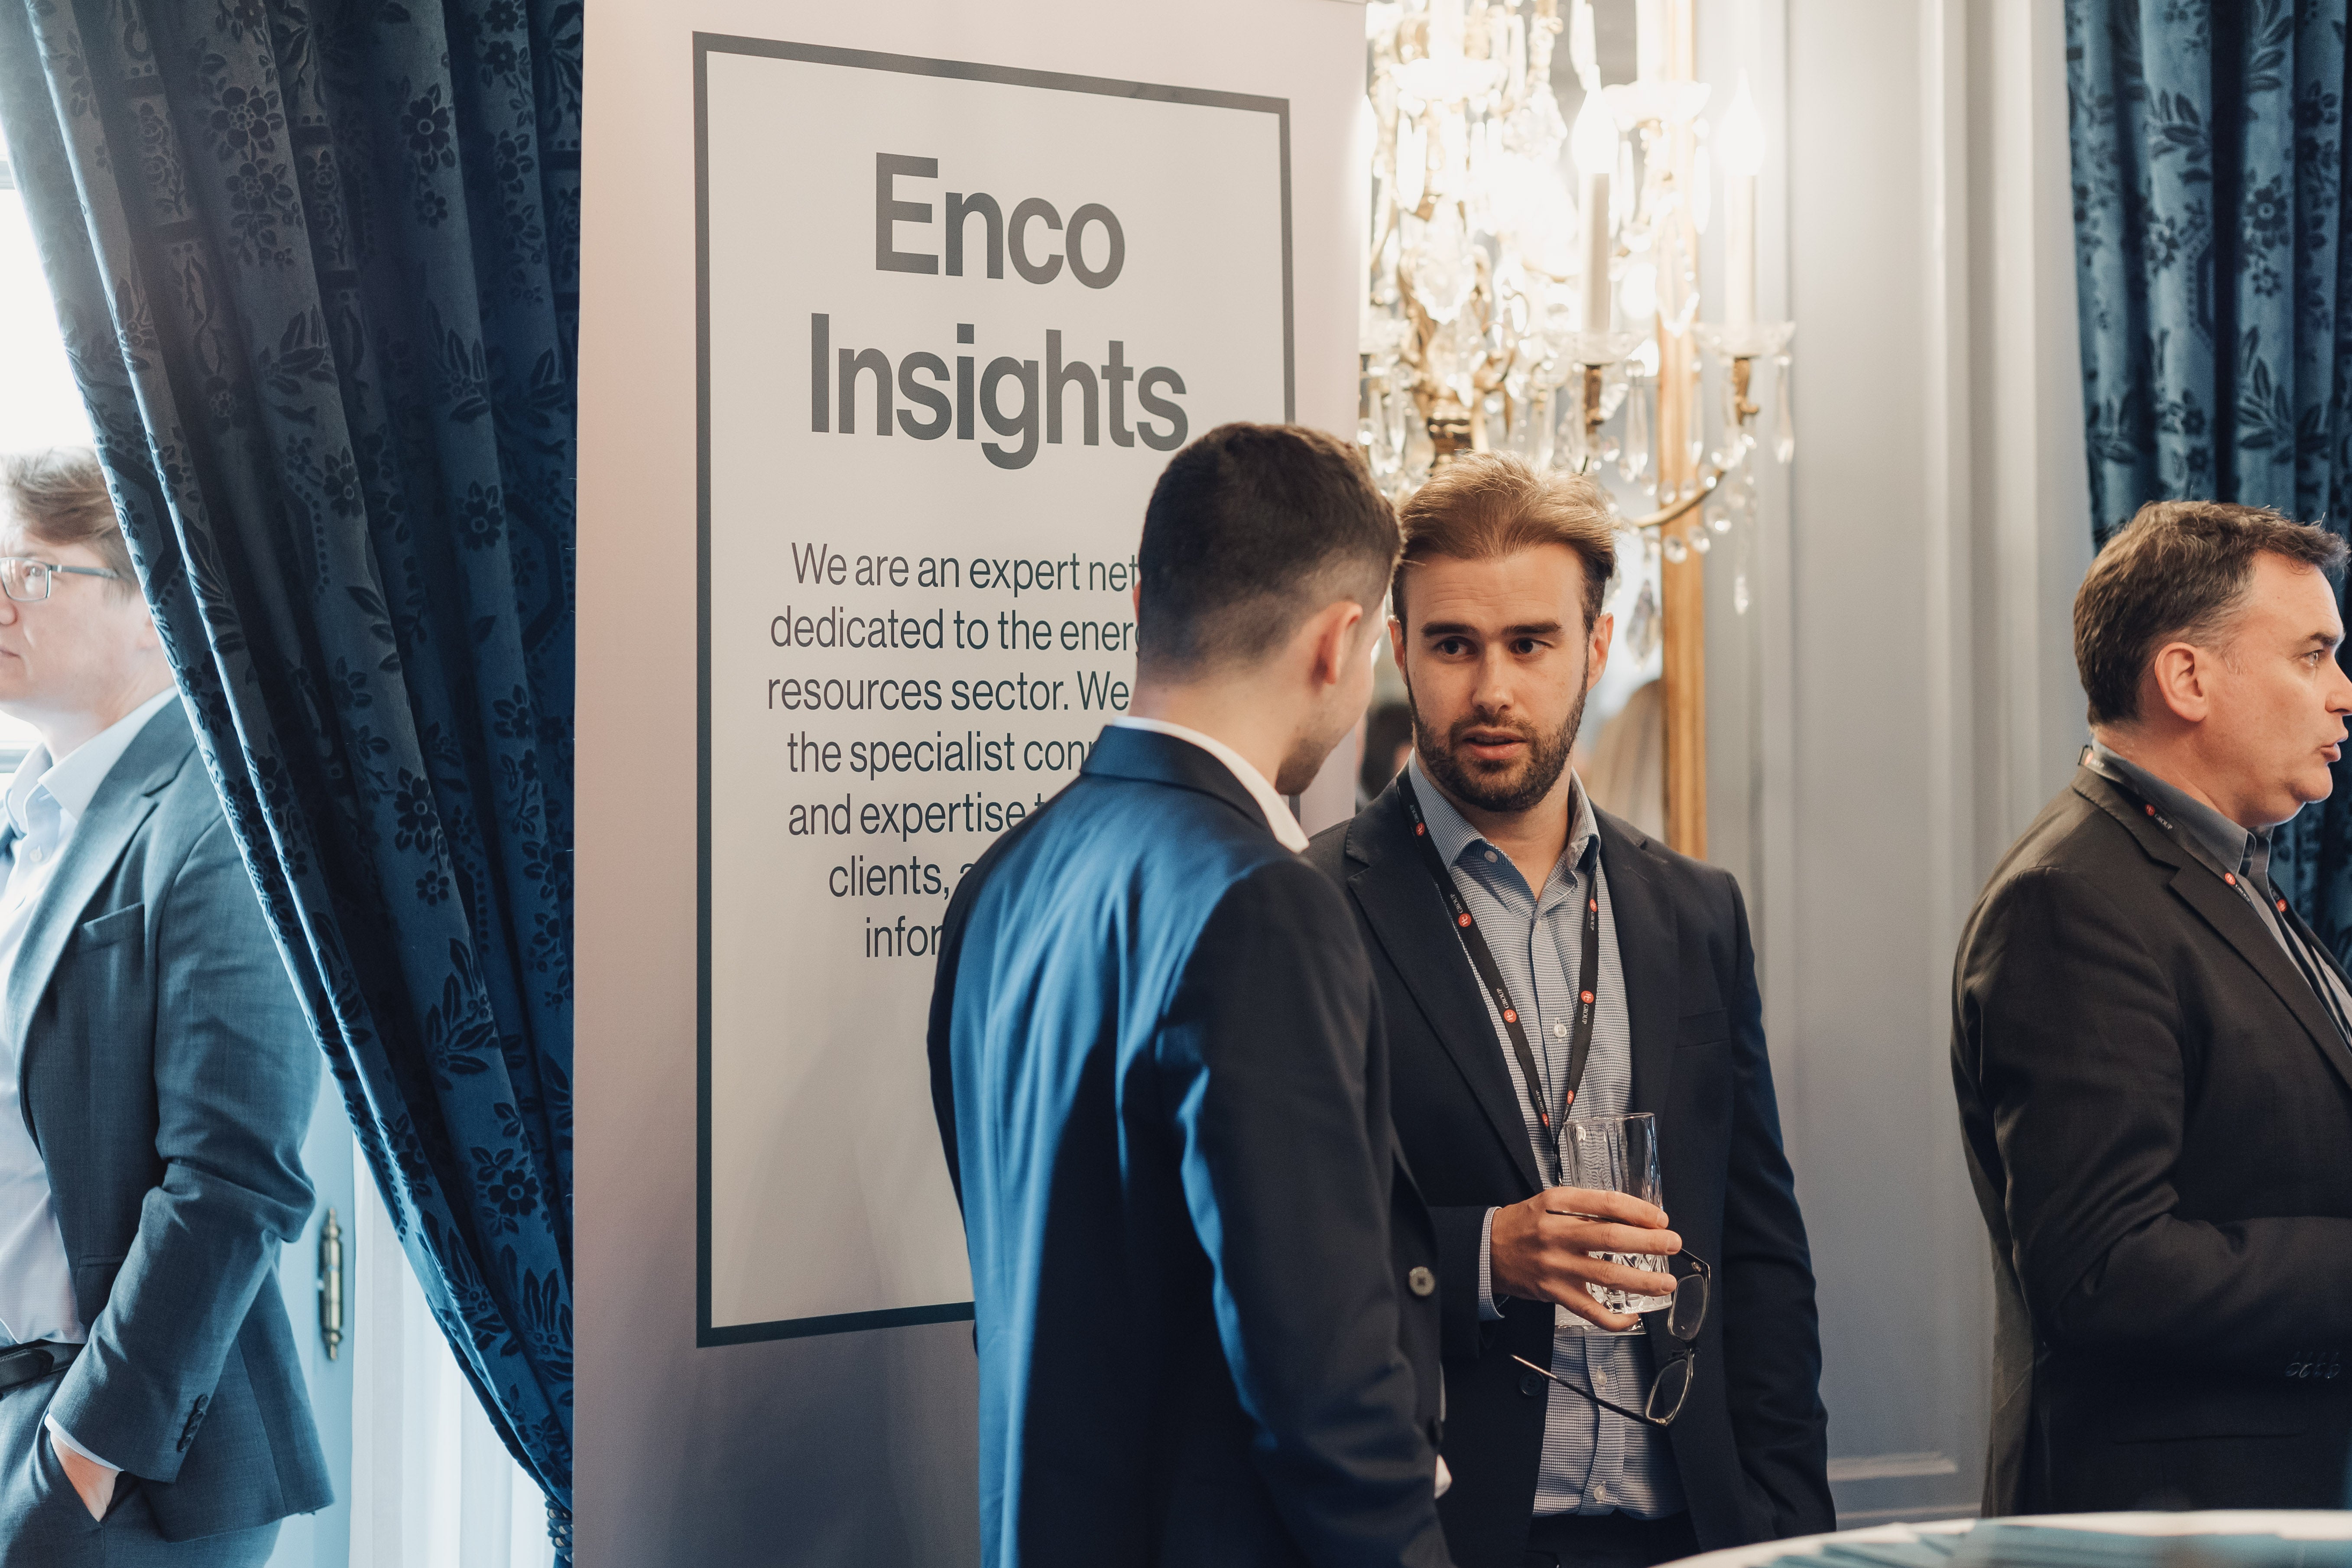 Enco Insights attended our live podcast event.